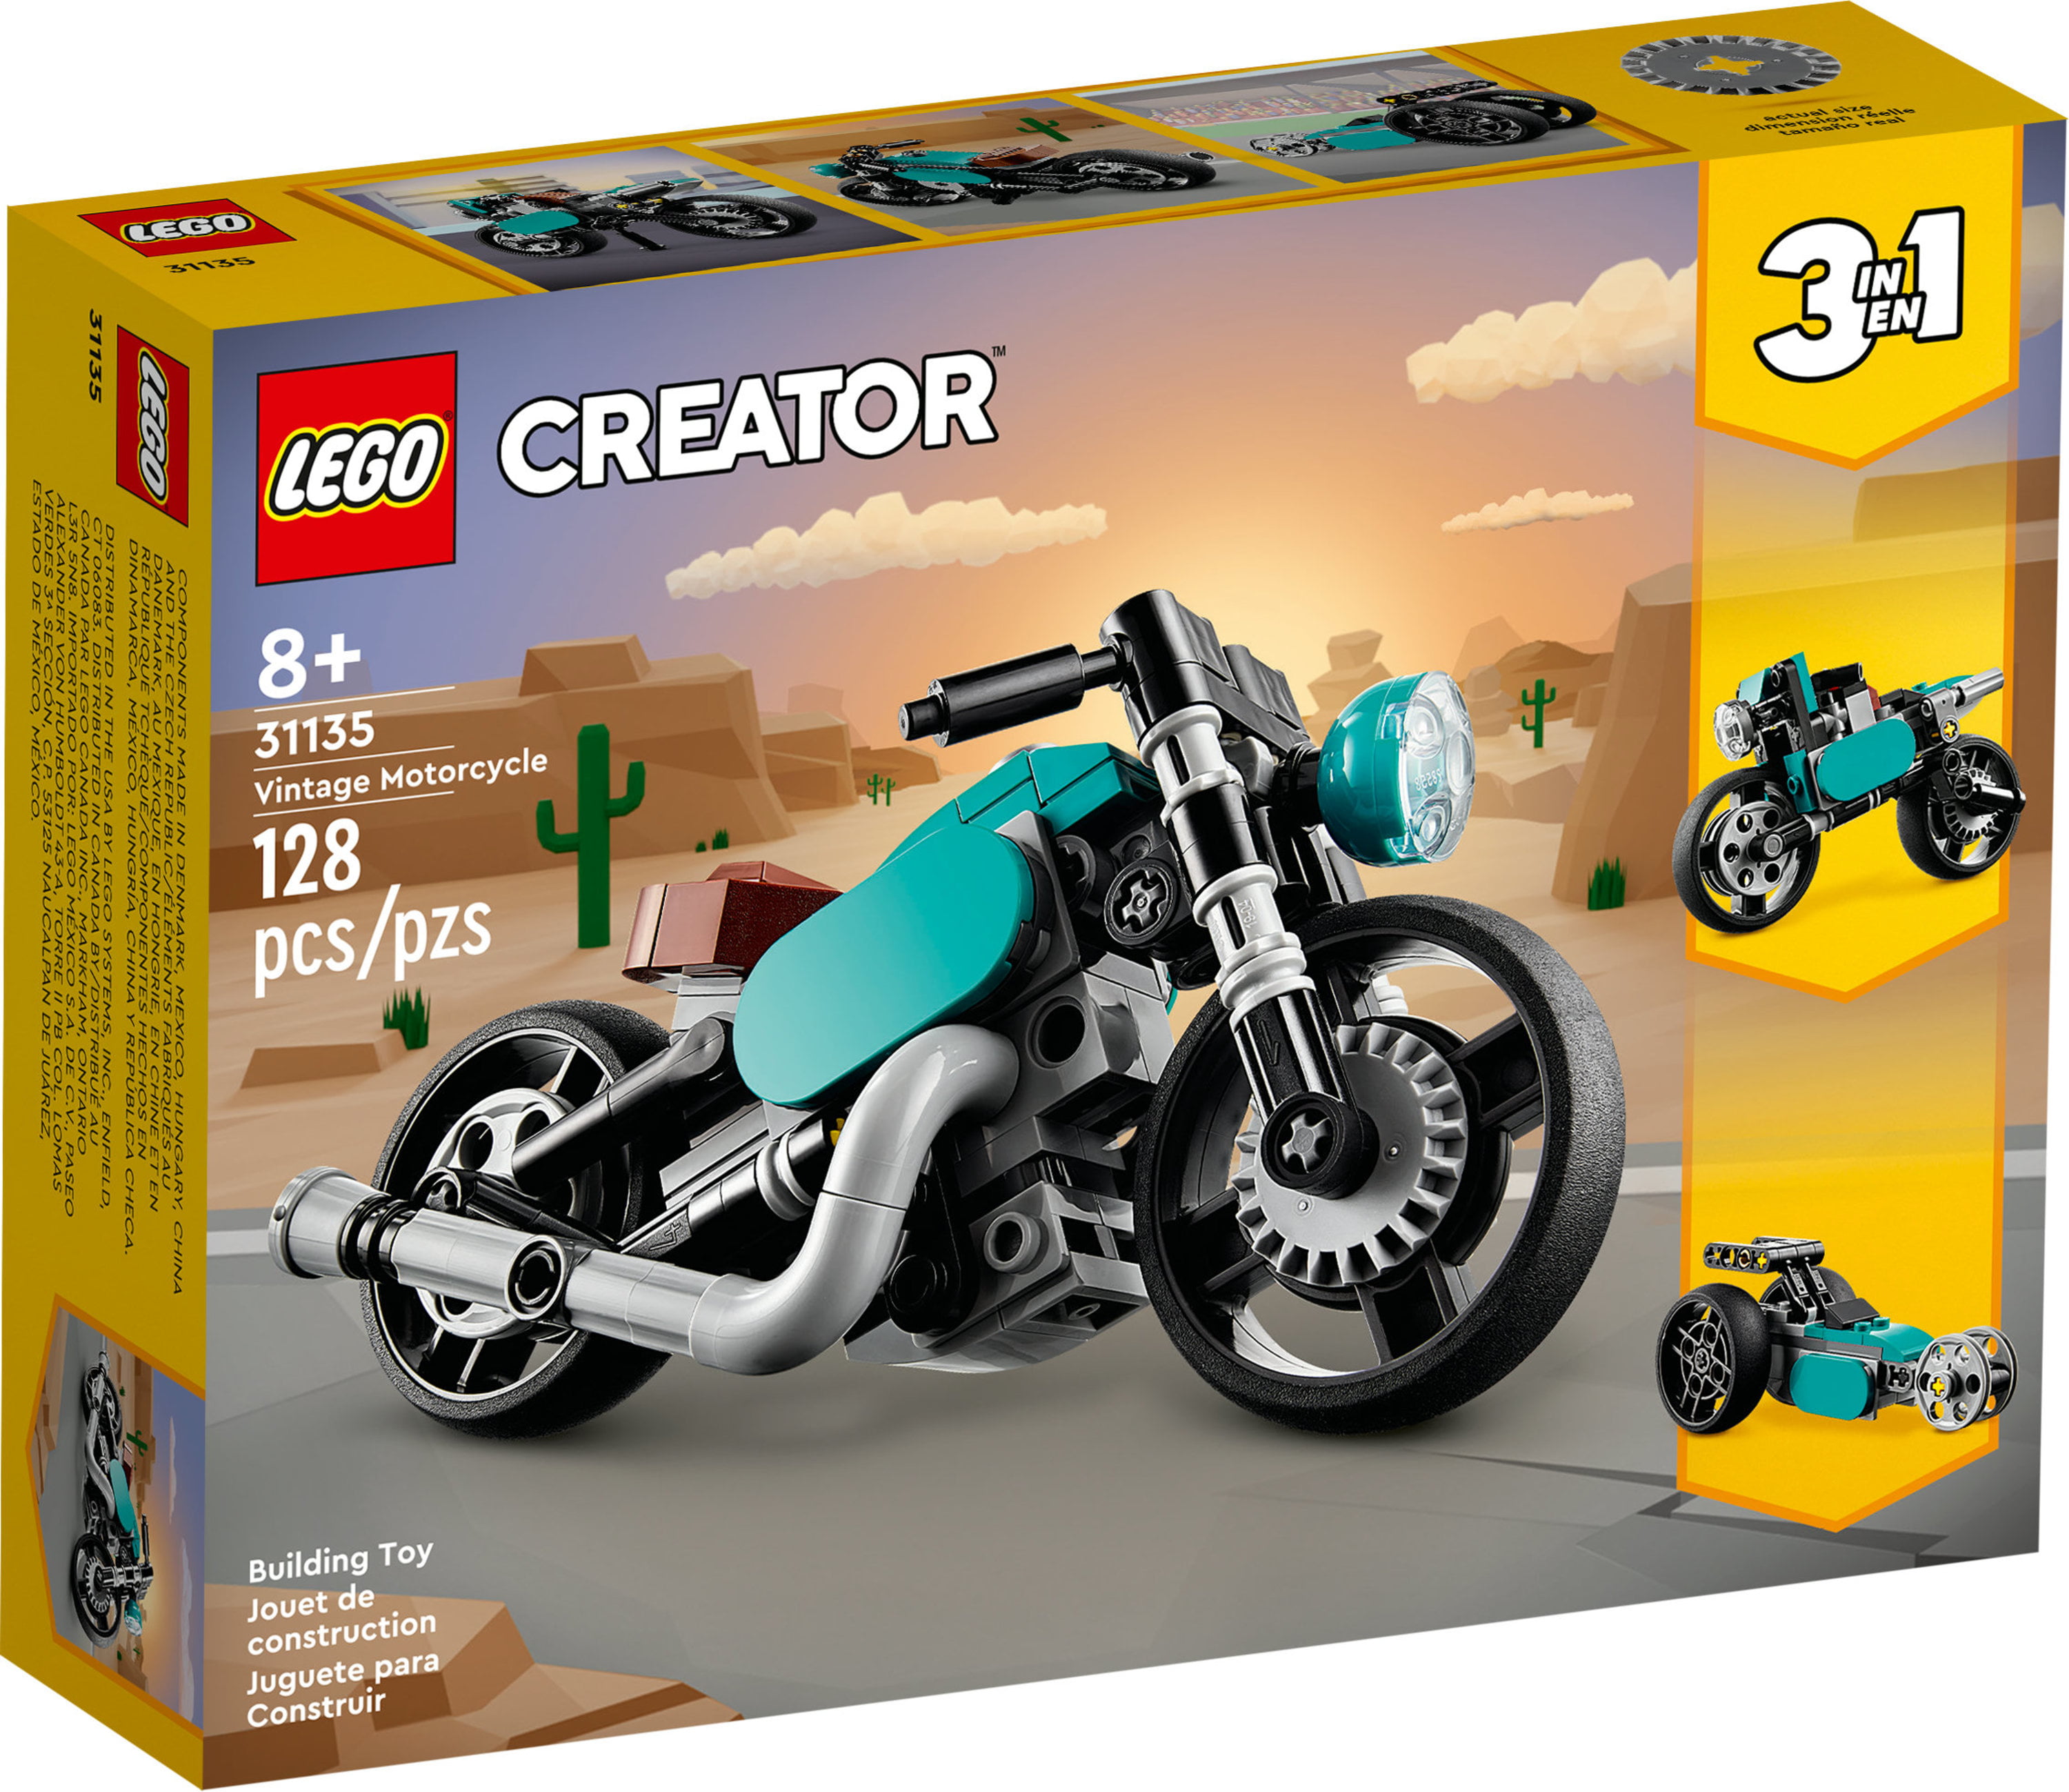 romantisk Pastor Brandy LEGO Creator 3-in-1 Vintage Motorcycle Set 31135 - Classic Motorcycle Toy  to Street Bike to Dragster Car, Vehicle Building Toys, Great Gift for Boys,  Girls, and Kids 8 Years Old and Up - Walmart.com